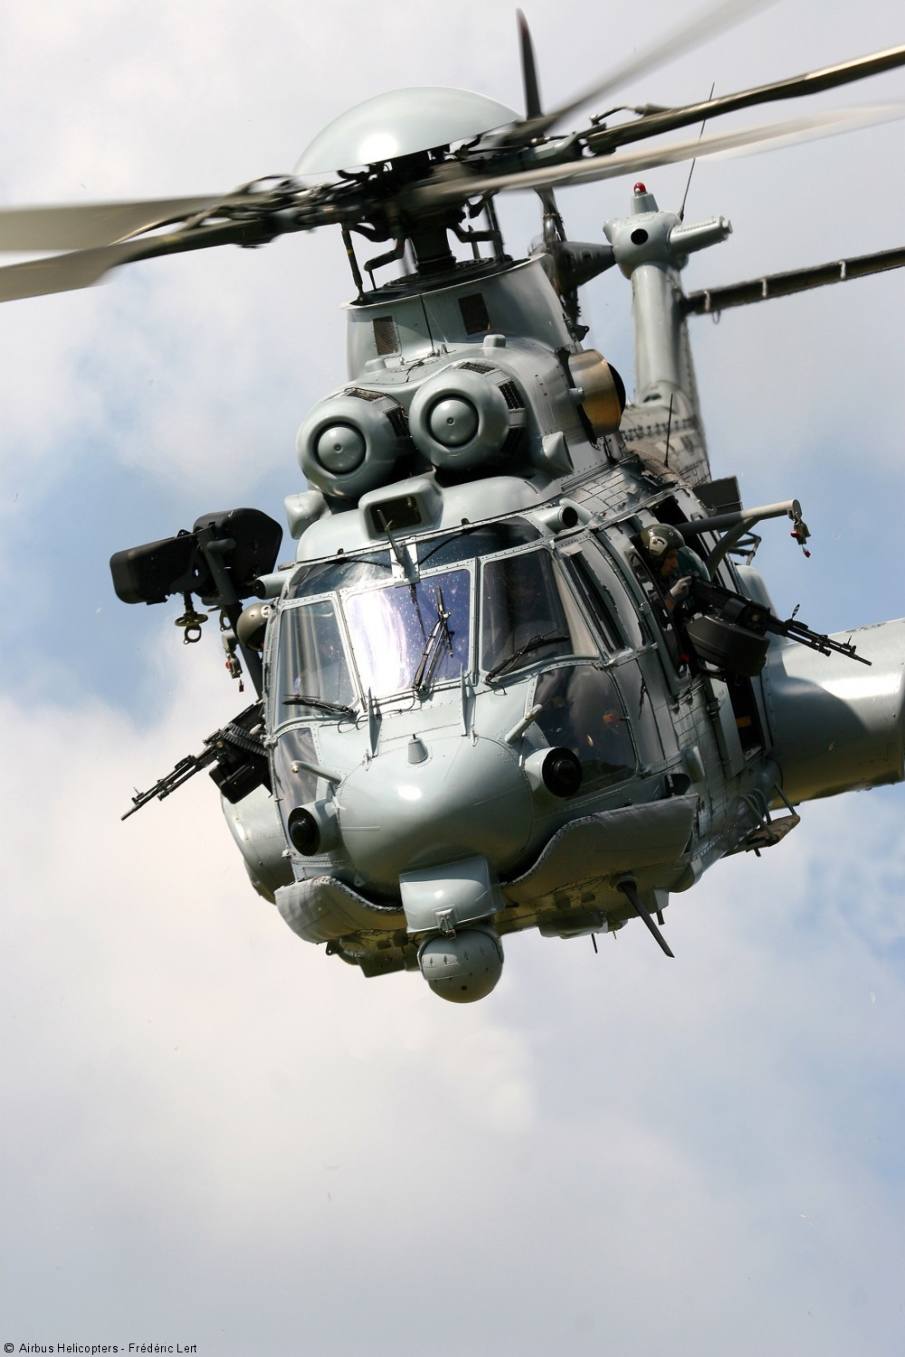 Bangkok orders two more H225Ms as Poland ends talks